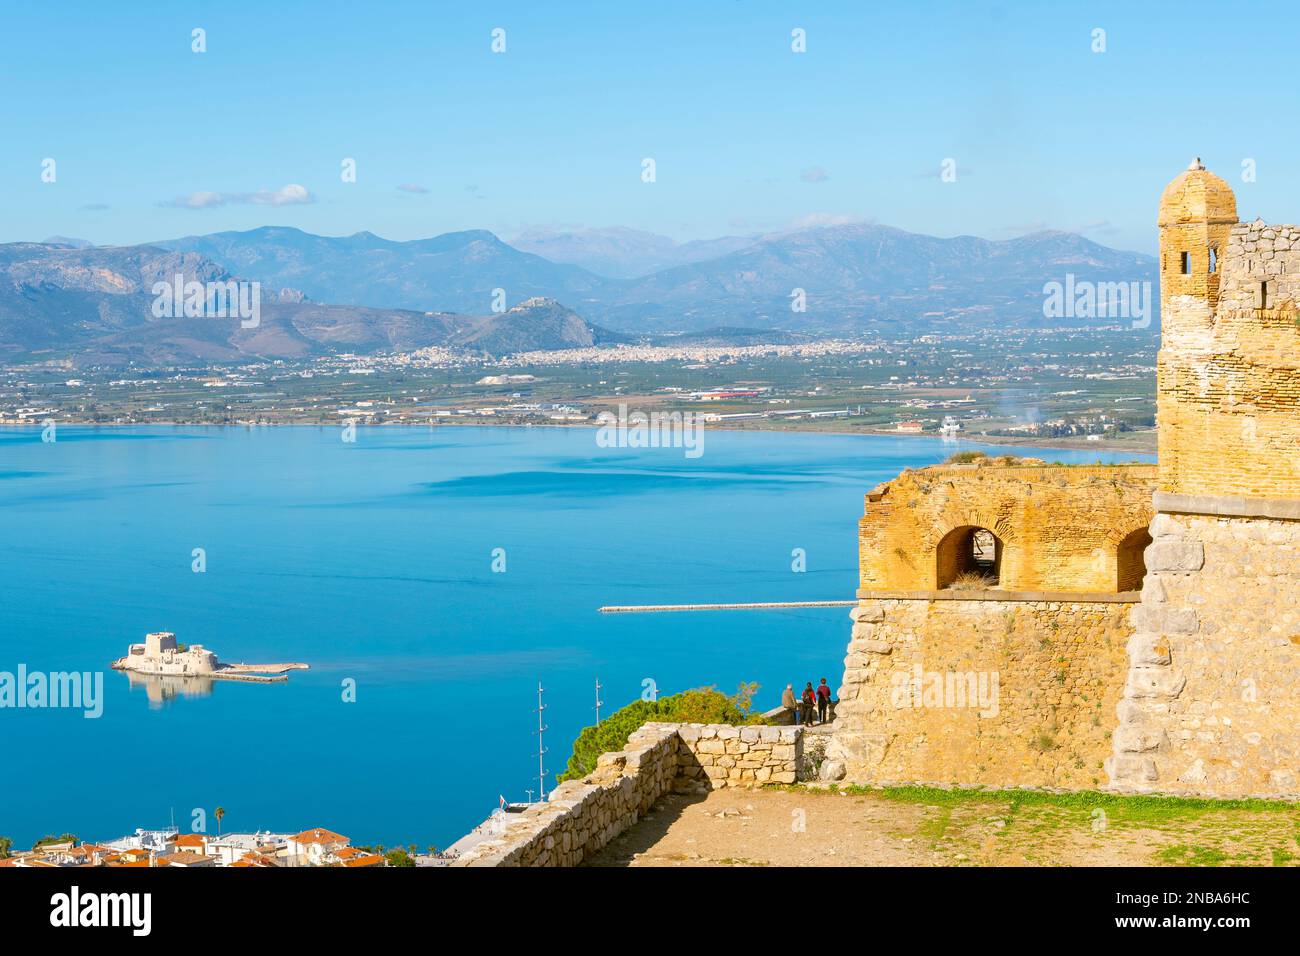 View from the ancient fortress of Palamidi above the Aegean Sea and the town of Nafplio, with the Bourtzi Castle in view in the blue waters of the bay Stock Photo